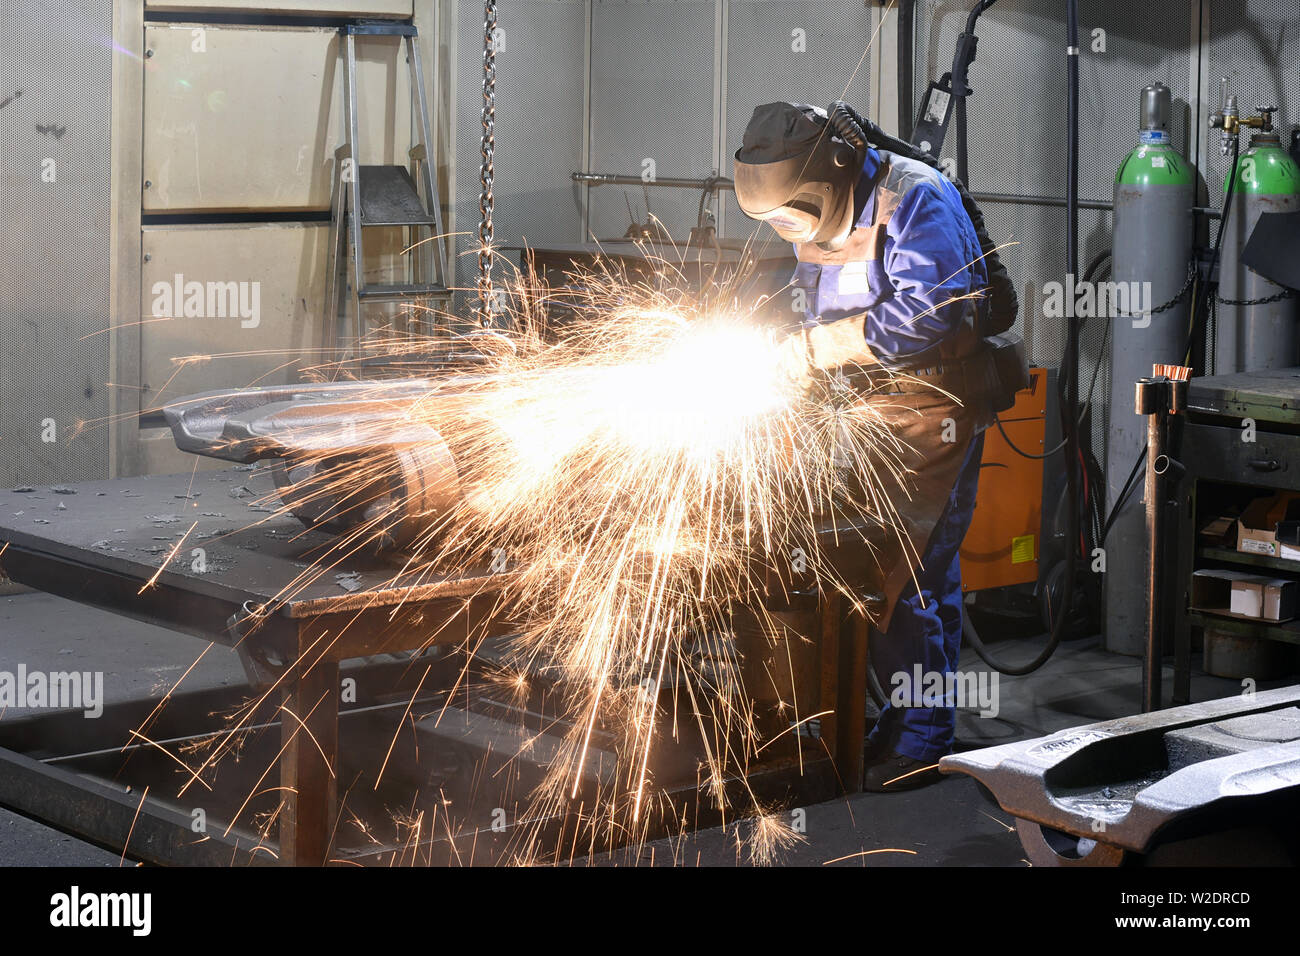 Workers in protective equipment in a foundry work on a casting with a grinding machine at the workplace Stock Photo